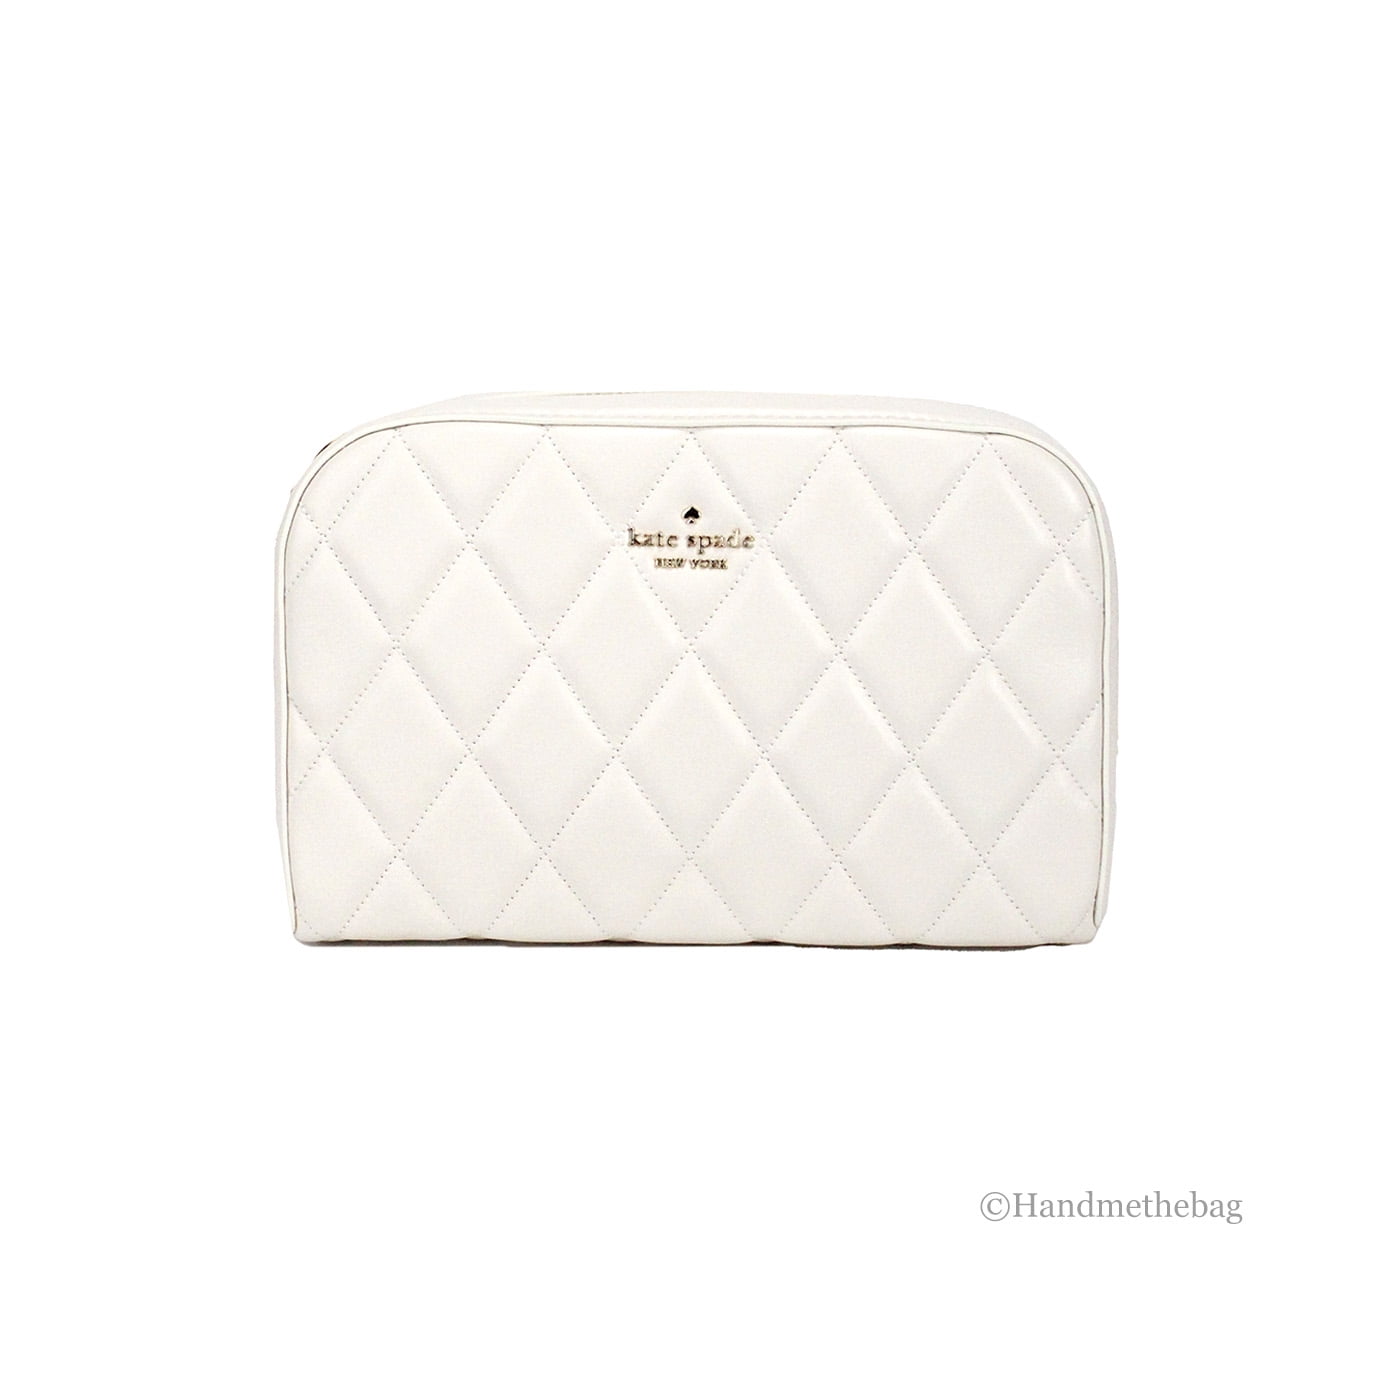 Kate Spade - Coral Quilted Purse - $60 - From Shae